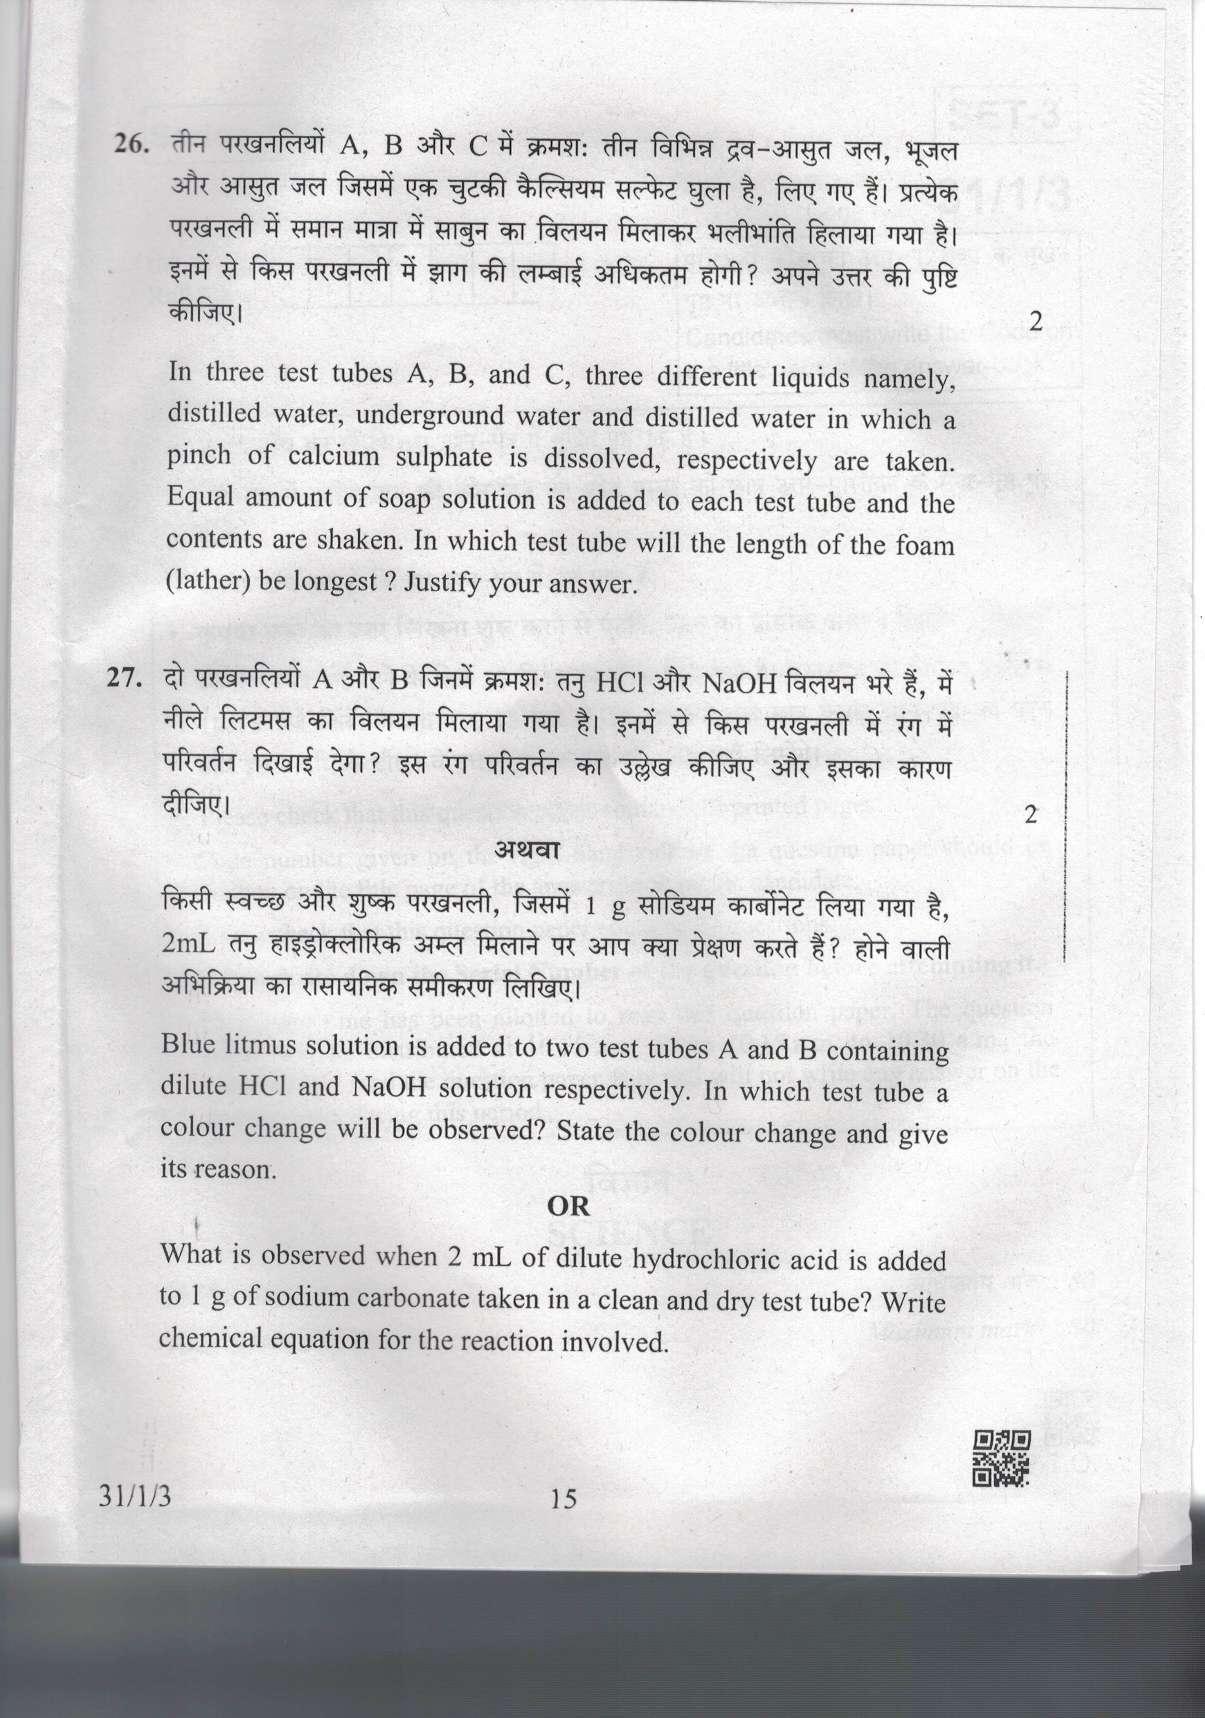 CBSE Class 10 31-1-3 Science 2019 Question Paper - Page 15